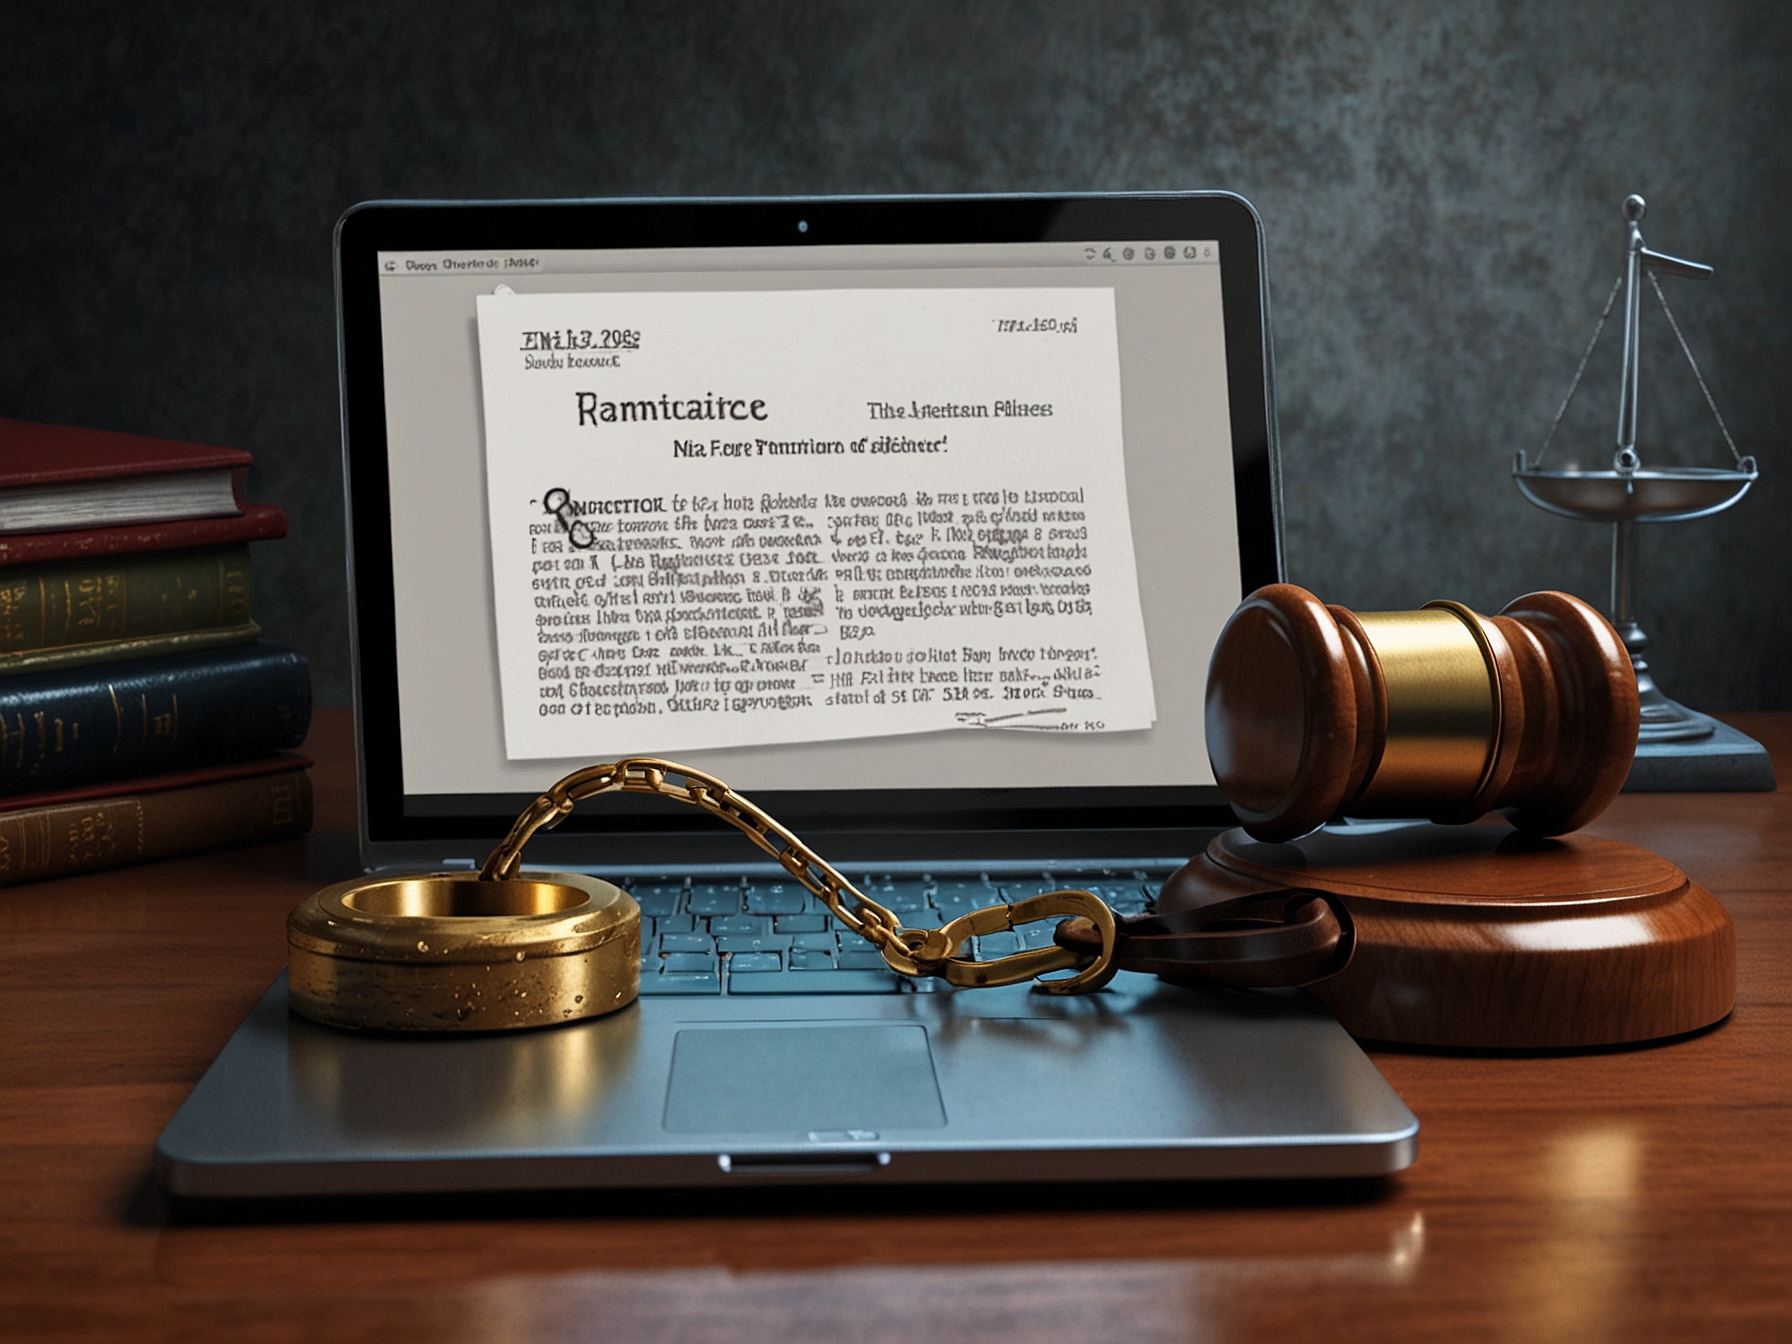 A gavel and a handcuff rest on top of a laptop, representing the legal ramifications and charges faced by the operators of the illegal streaming platform convicted by the Justice Department.